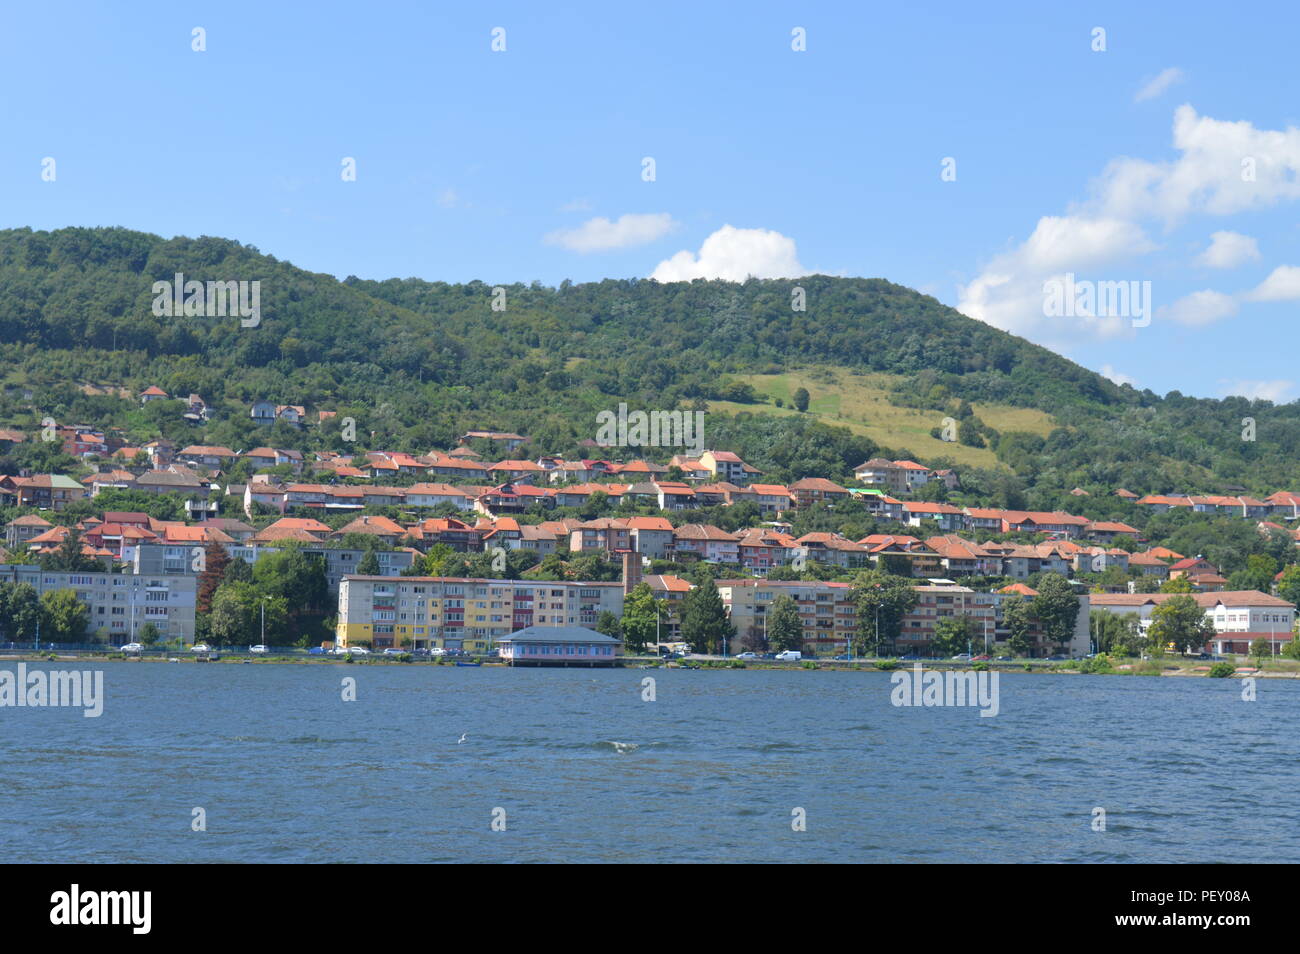 The Gorge of the Danube Stock Photo